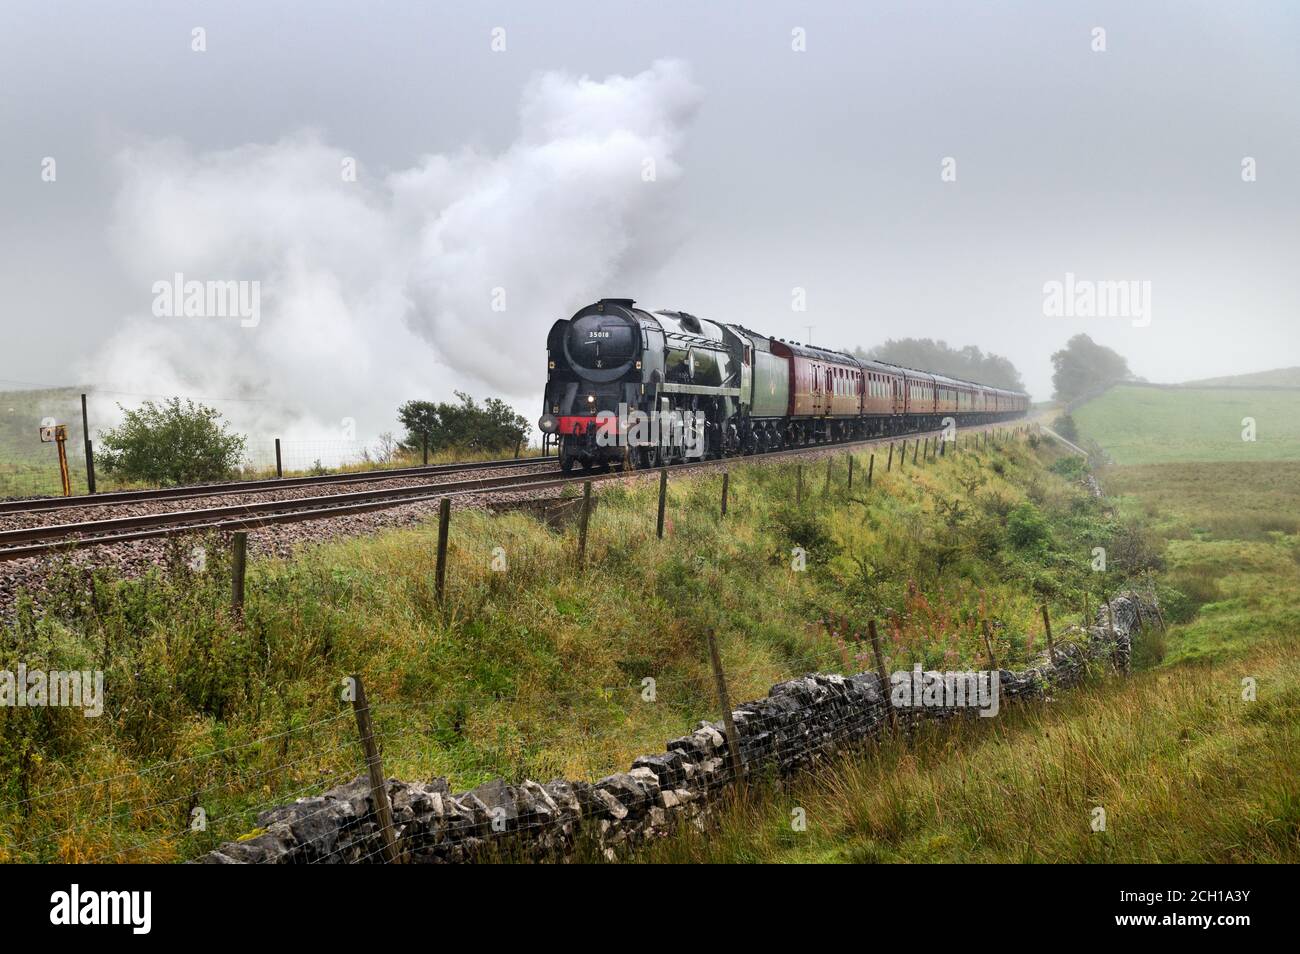 Steam loco 'British India Line' hauls 'The Dalesman' train on a wet and misty day. Seen at Selside, Ribblesdale, Yorkshire Dales National Park, UK Stock Photo